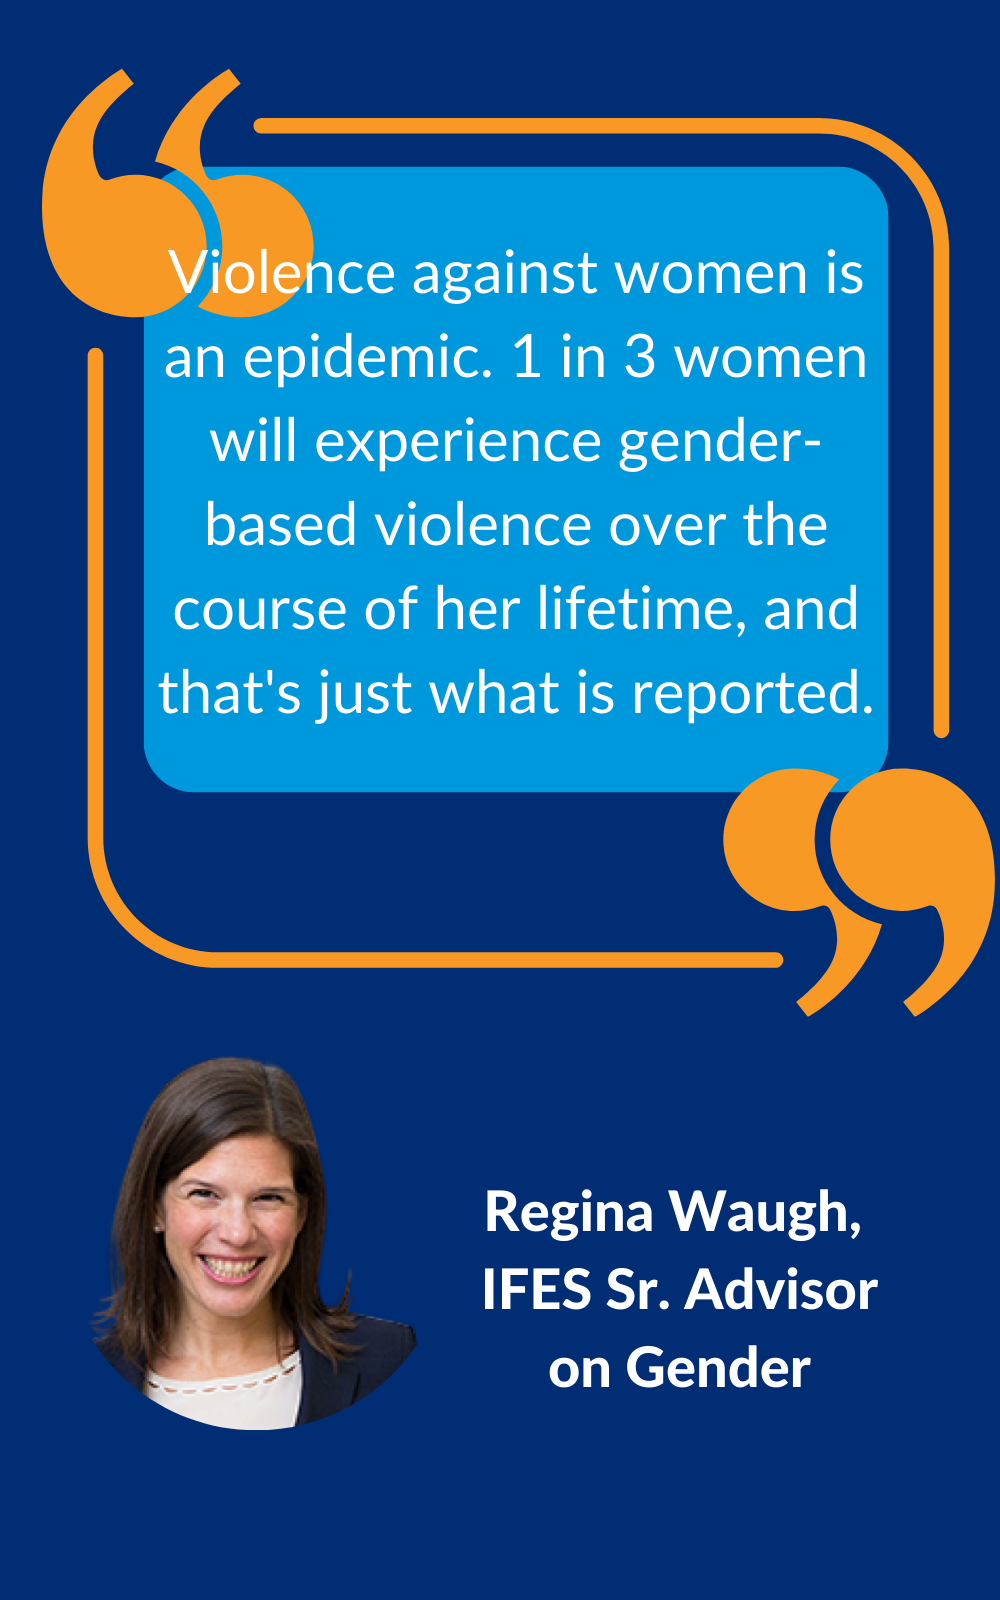 Violence against women is an epidemic. 1 in 3 women will experience gender-based violence over the course of her lifetime, and that's just what is reported. Regina Waugh,  IFES Sr. Advisor on Gender